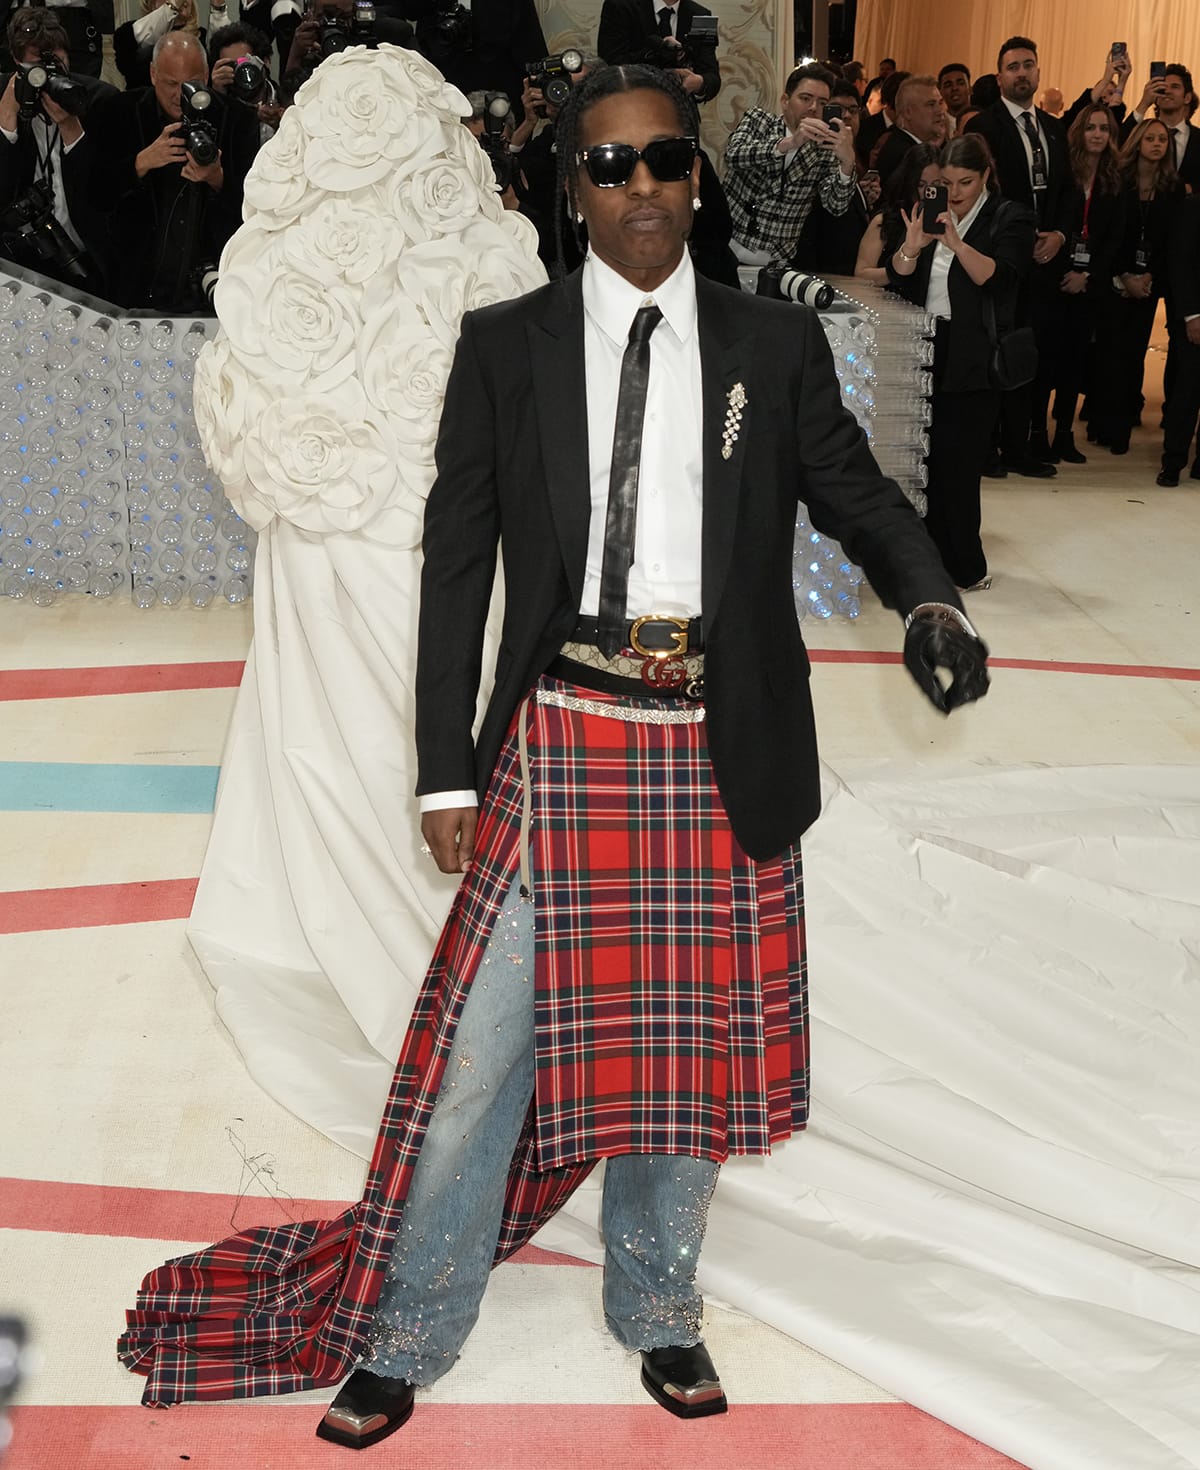 A$AP Rocky recreates Karl Lagerfeld's 2005 look with a Gucci high-low kilt, embellished jeans, white shirt, and black blazer